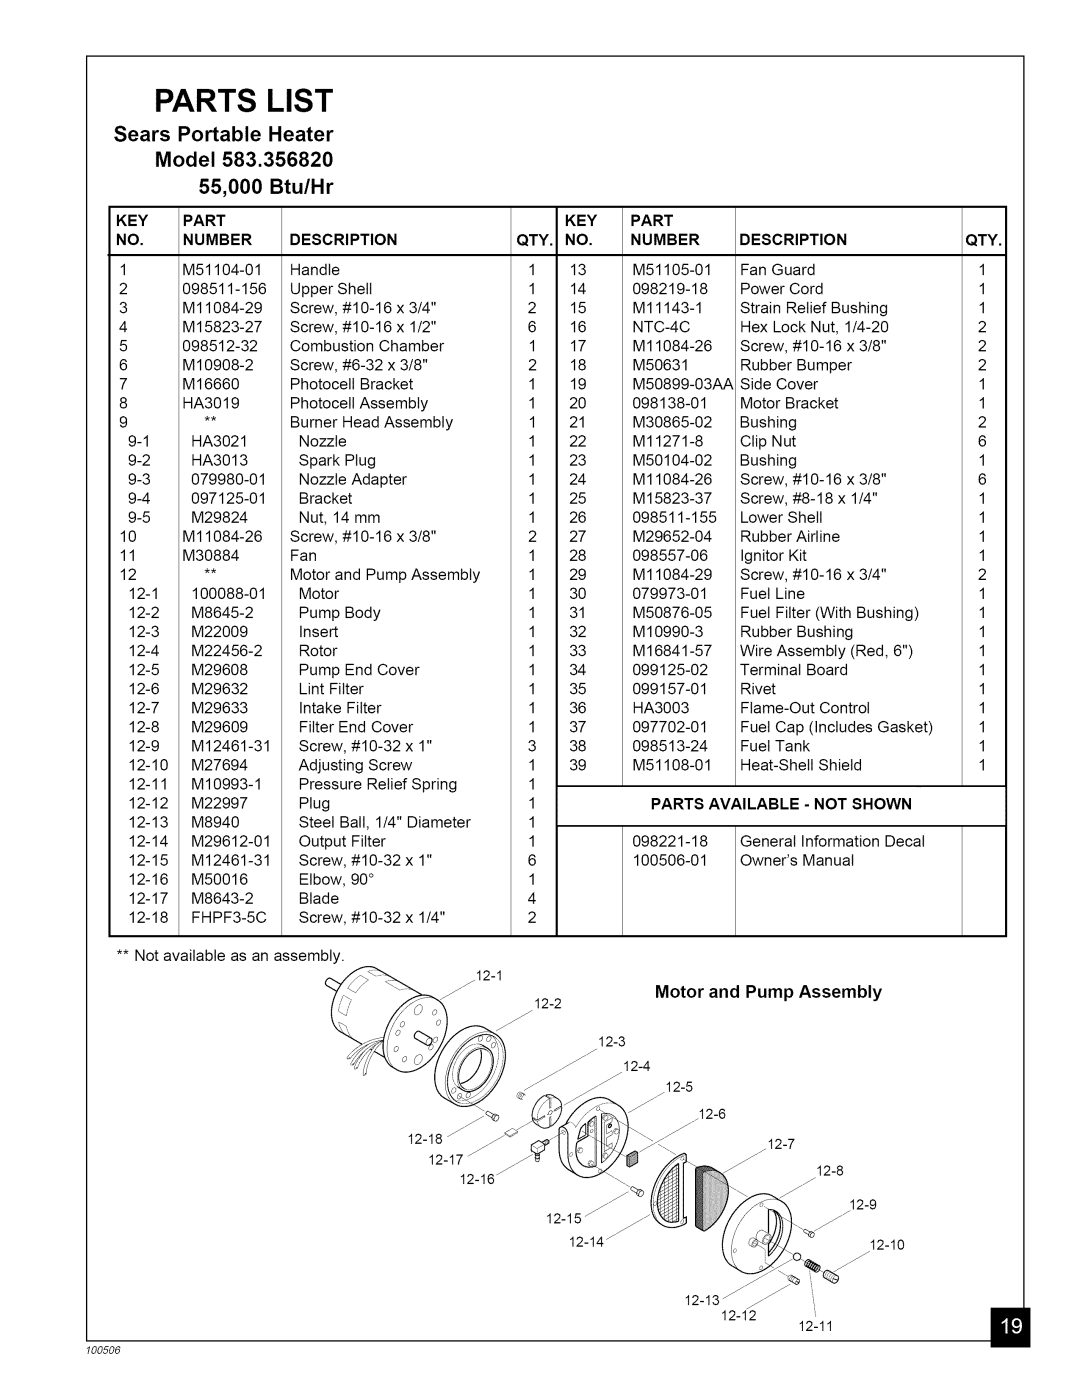 Sears 583.35682 Parts List, Sears Portable Heater Model 55,000 Btu/Hr, Motor and Pump Assembly, Key Part No. Number 